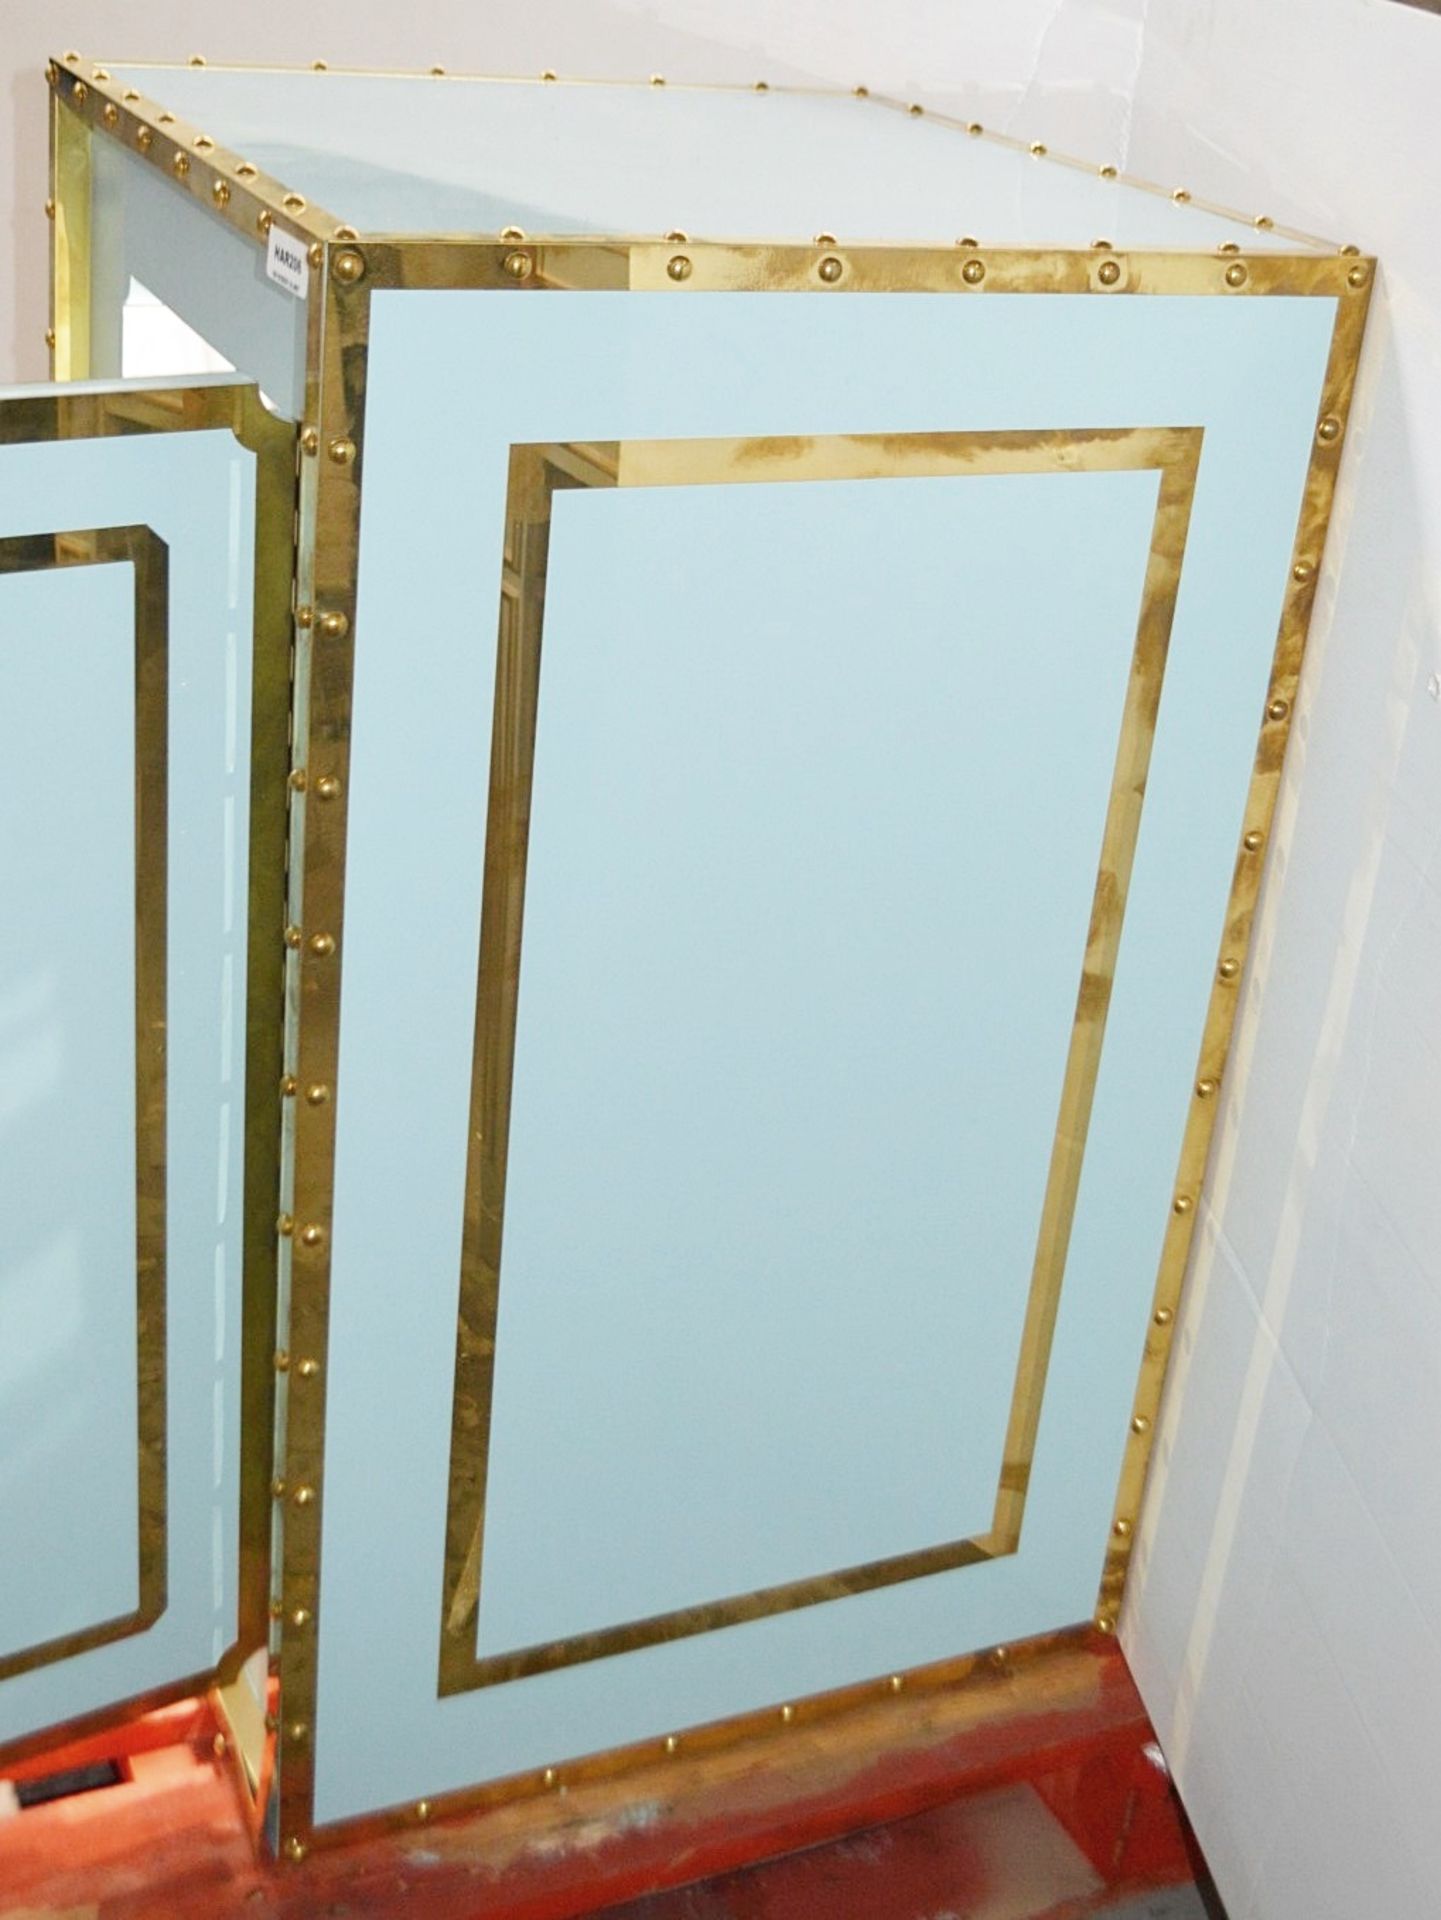 1 x Illuminated Bank Vault Safe-style Mirrored Retail Shop Display Box In Tiffany Blue - Dimensions: - Image 5 of 6